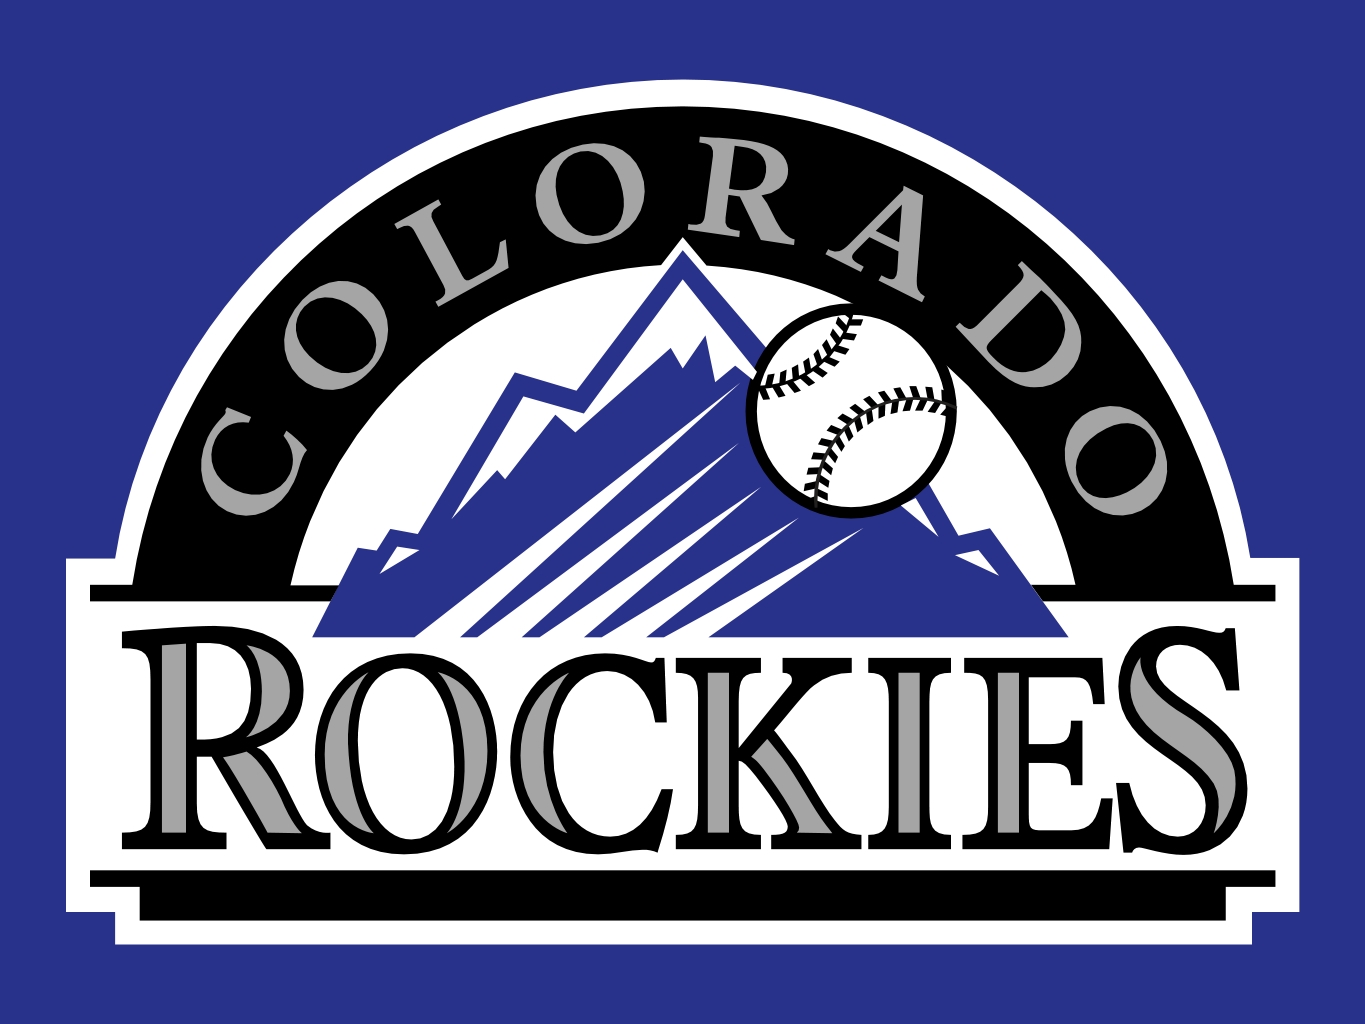 Colorado Rockies Wallpaper and Background Image | 1365x1024 | ID:612434